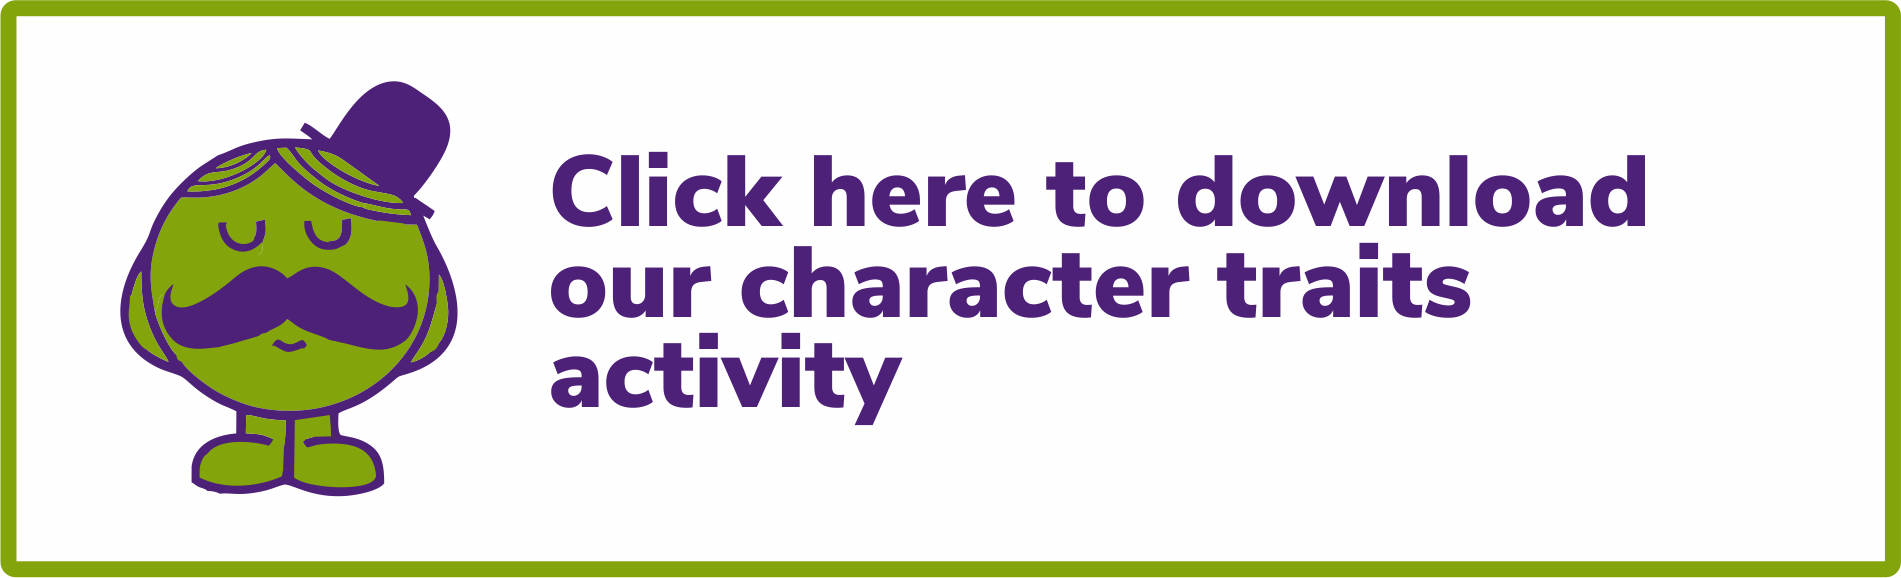 Click here to download our character traits  activity